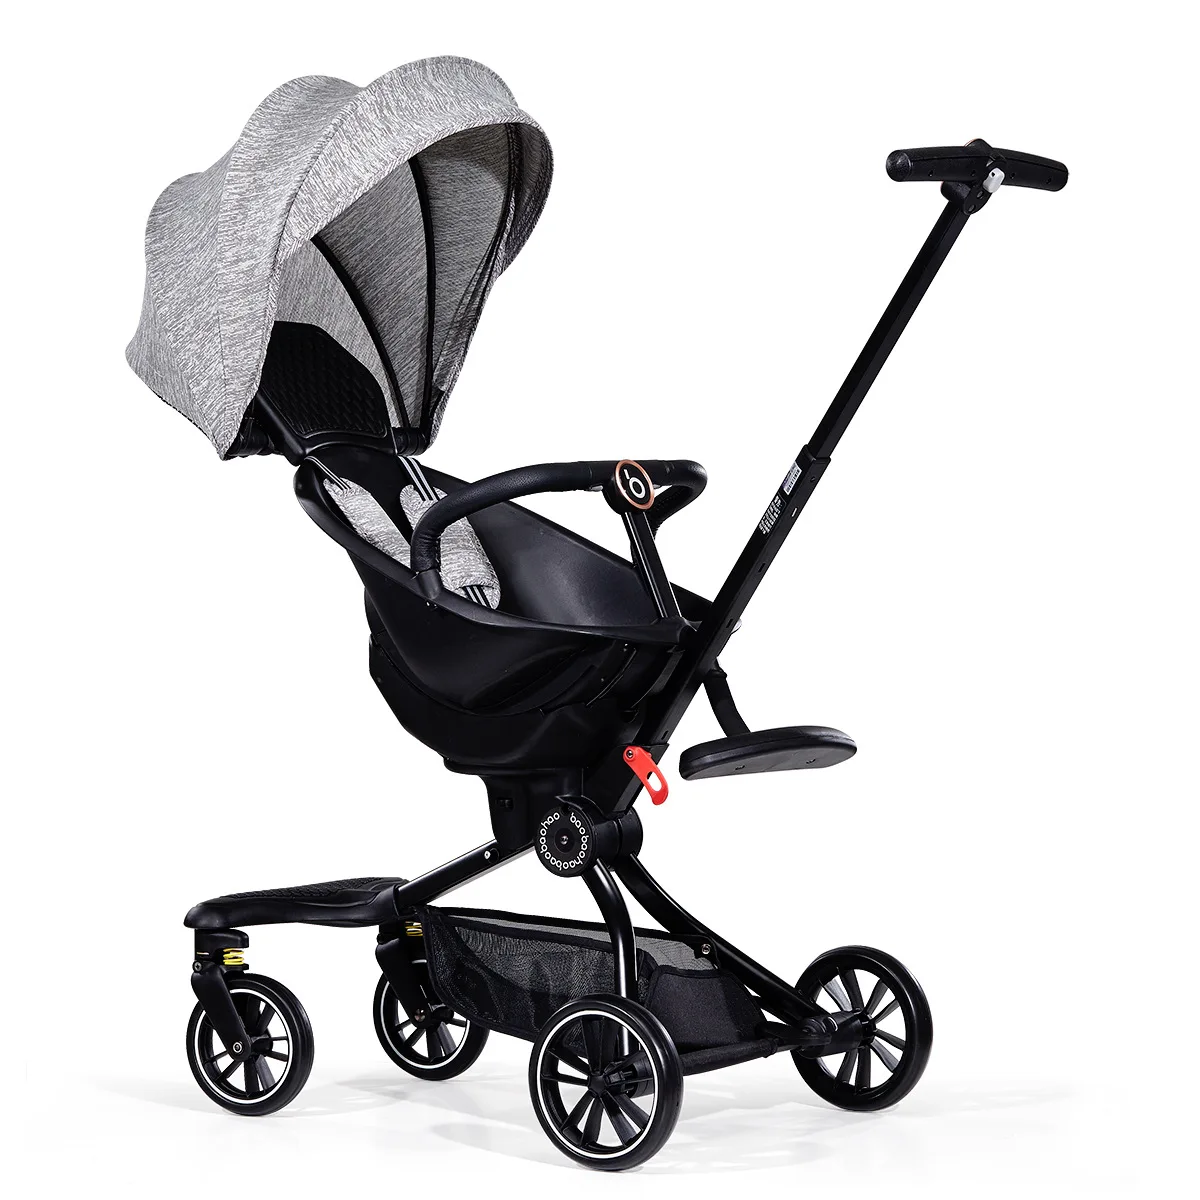 Baby Good V8 Baby Walker Artifact Walking Baby Stroller Can Sit and Lie Down Light Folding High-view Stroller Stroller